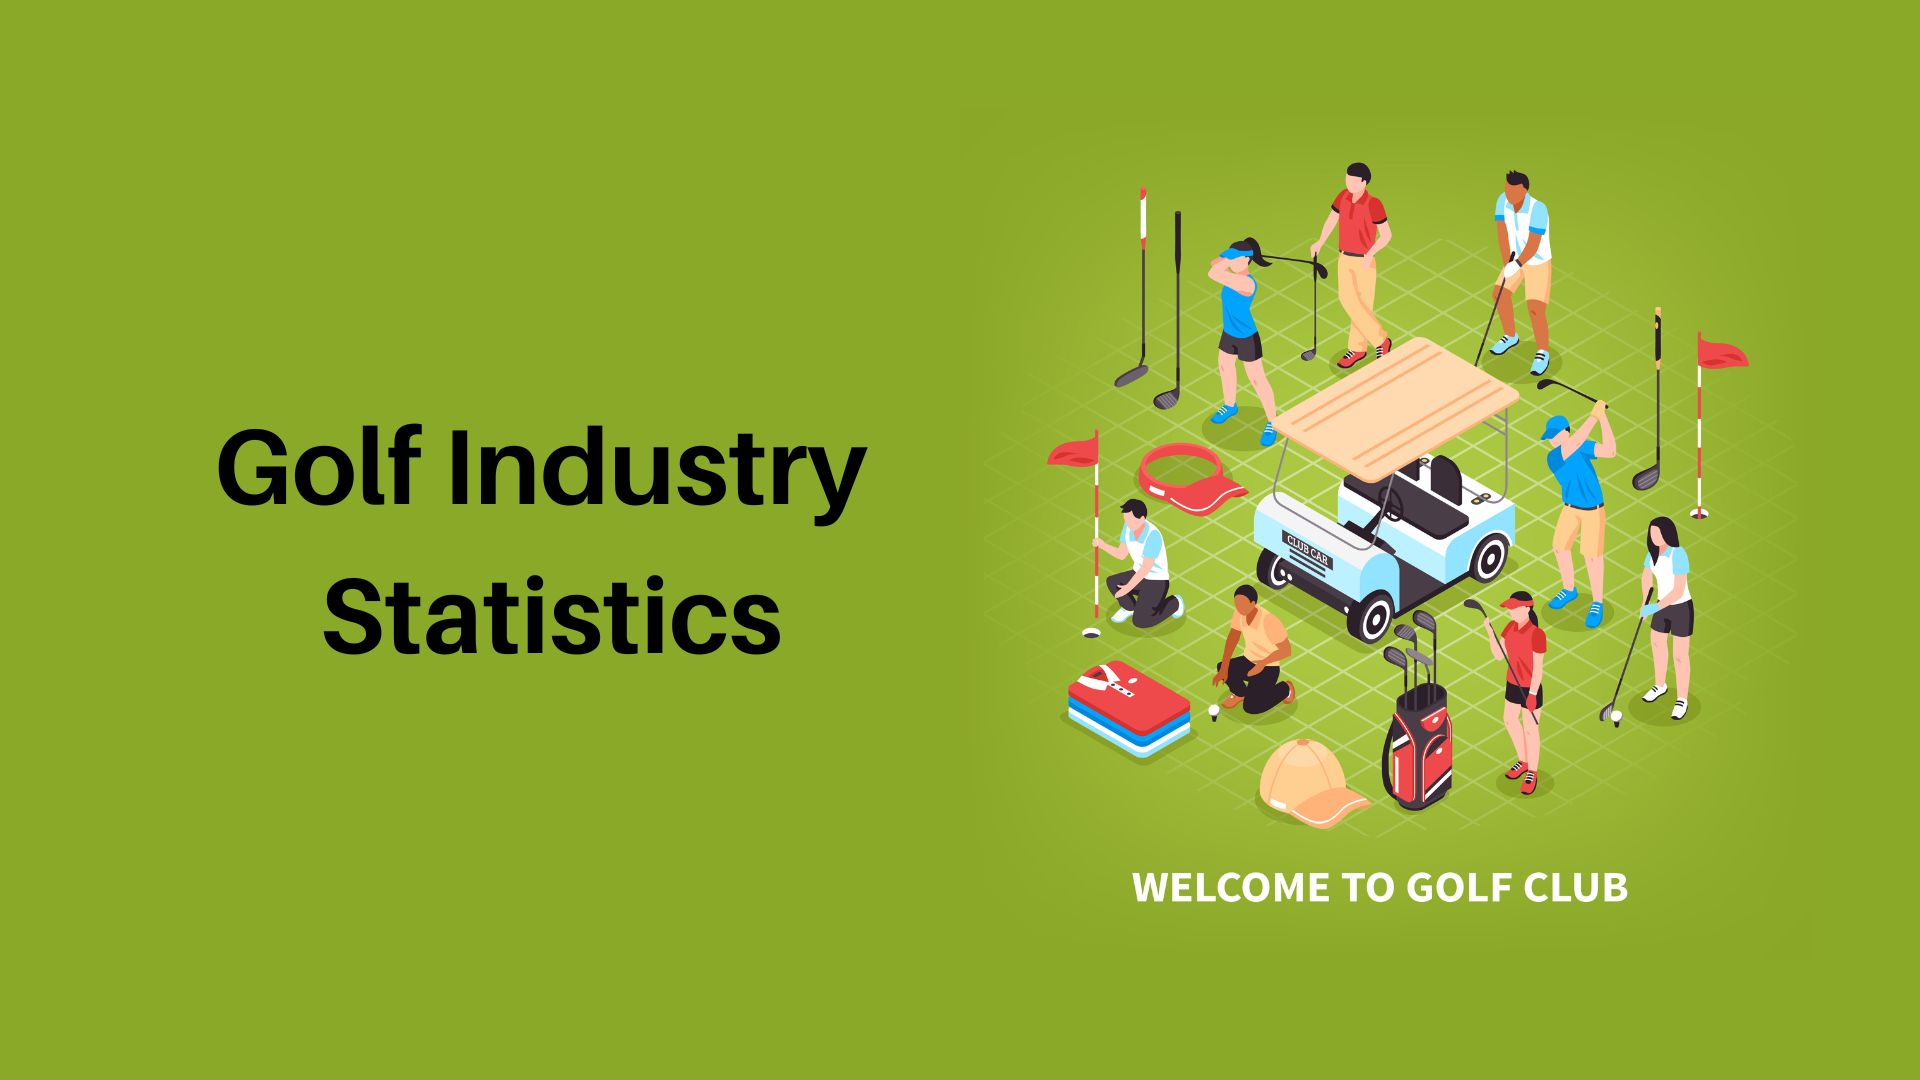 Golf Industry Statistics By Annual Spending, Business, States, Region, Country and Golf Apps